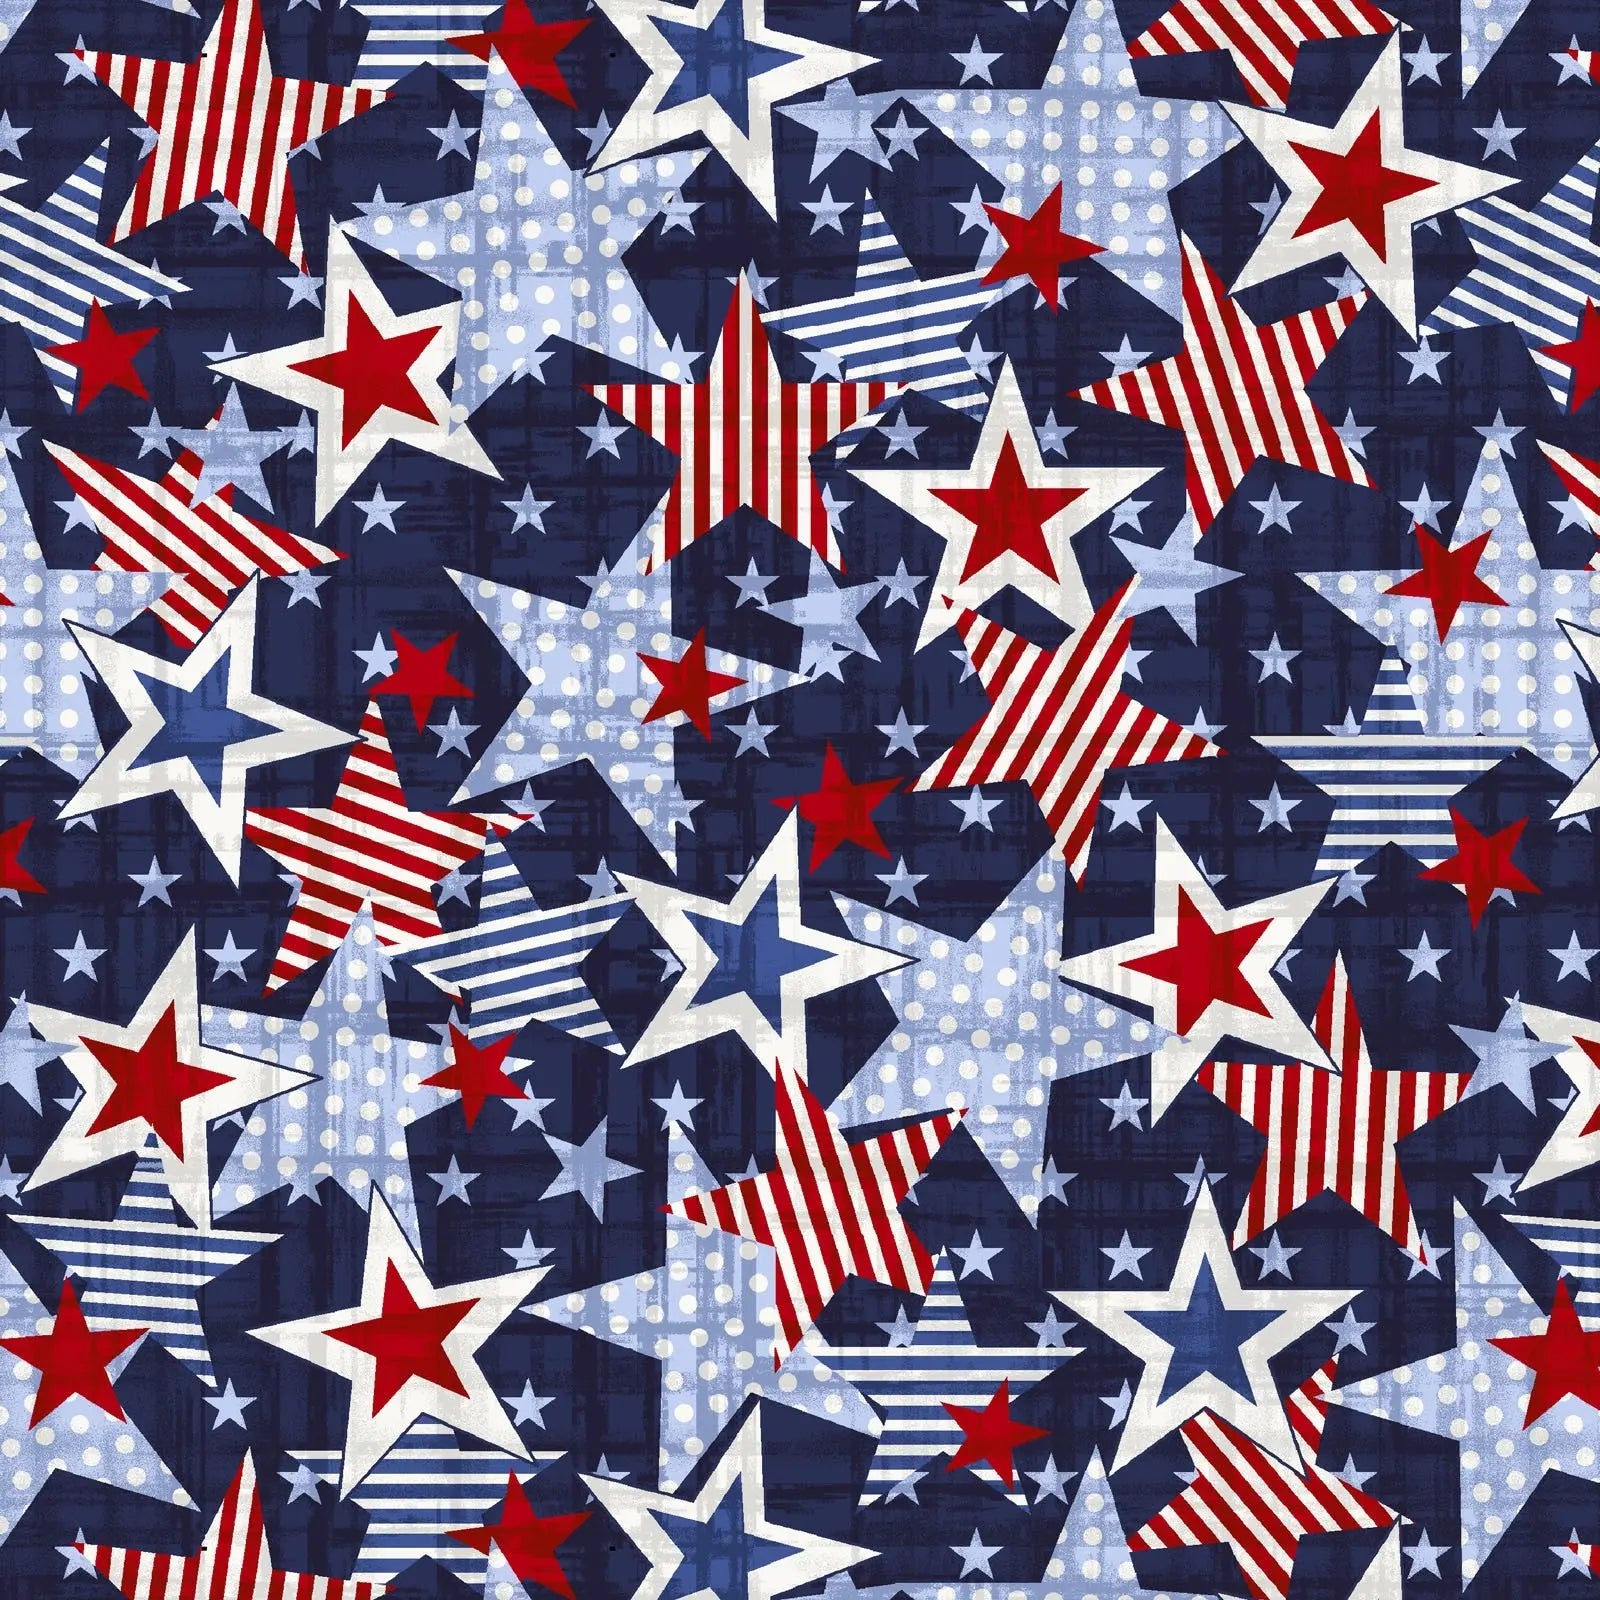 Red White and Starry Blue Too Stars Cotton Wideback Fabric per yard - Linda's Electric Quilters